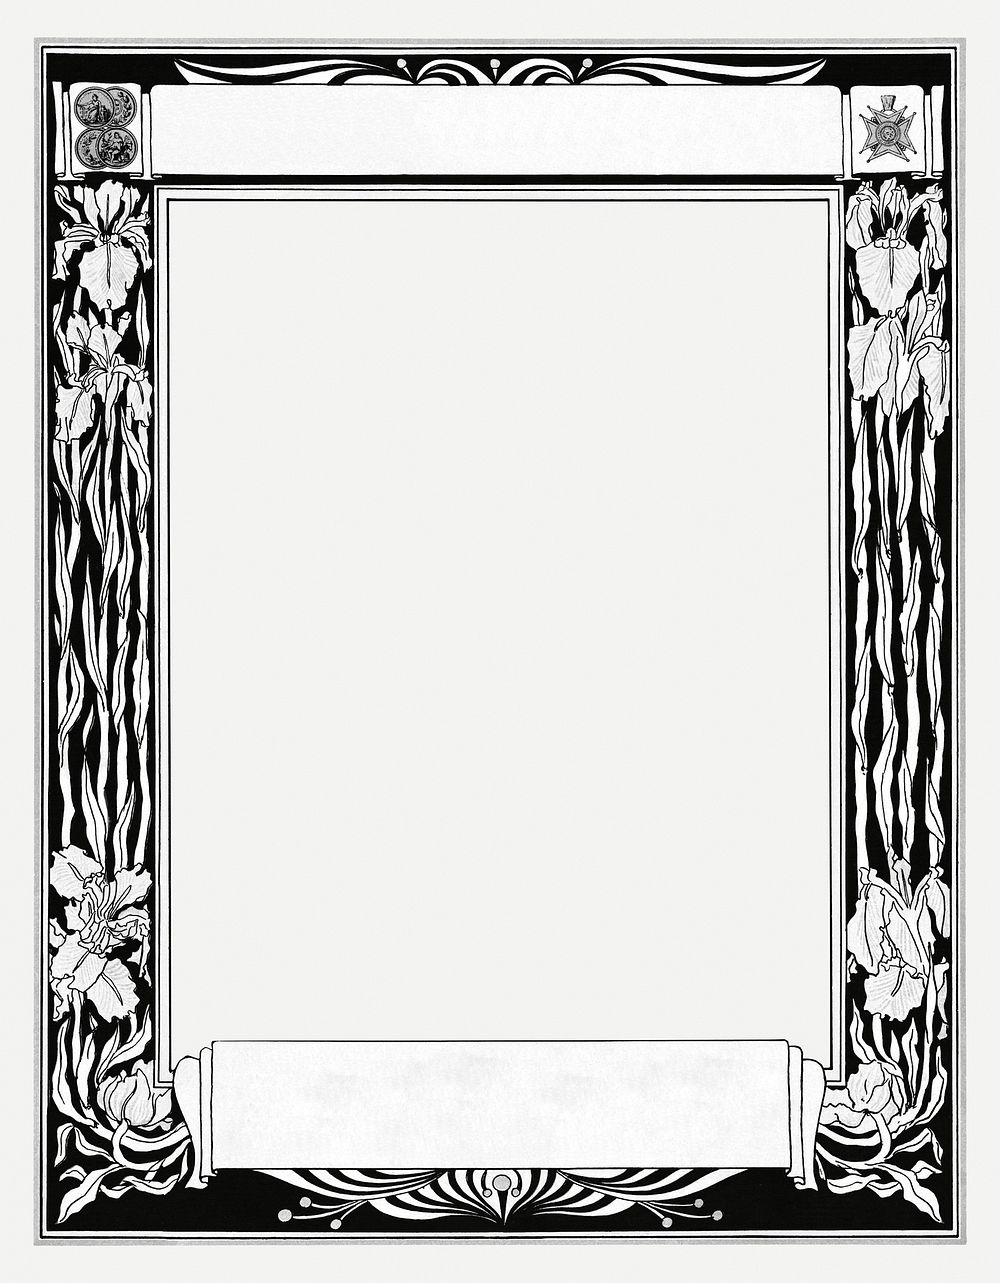 Frame psd with vintage black floral border, remixed from the artworks by Johann Georg van Caspel